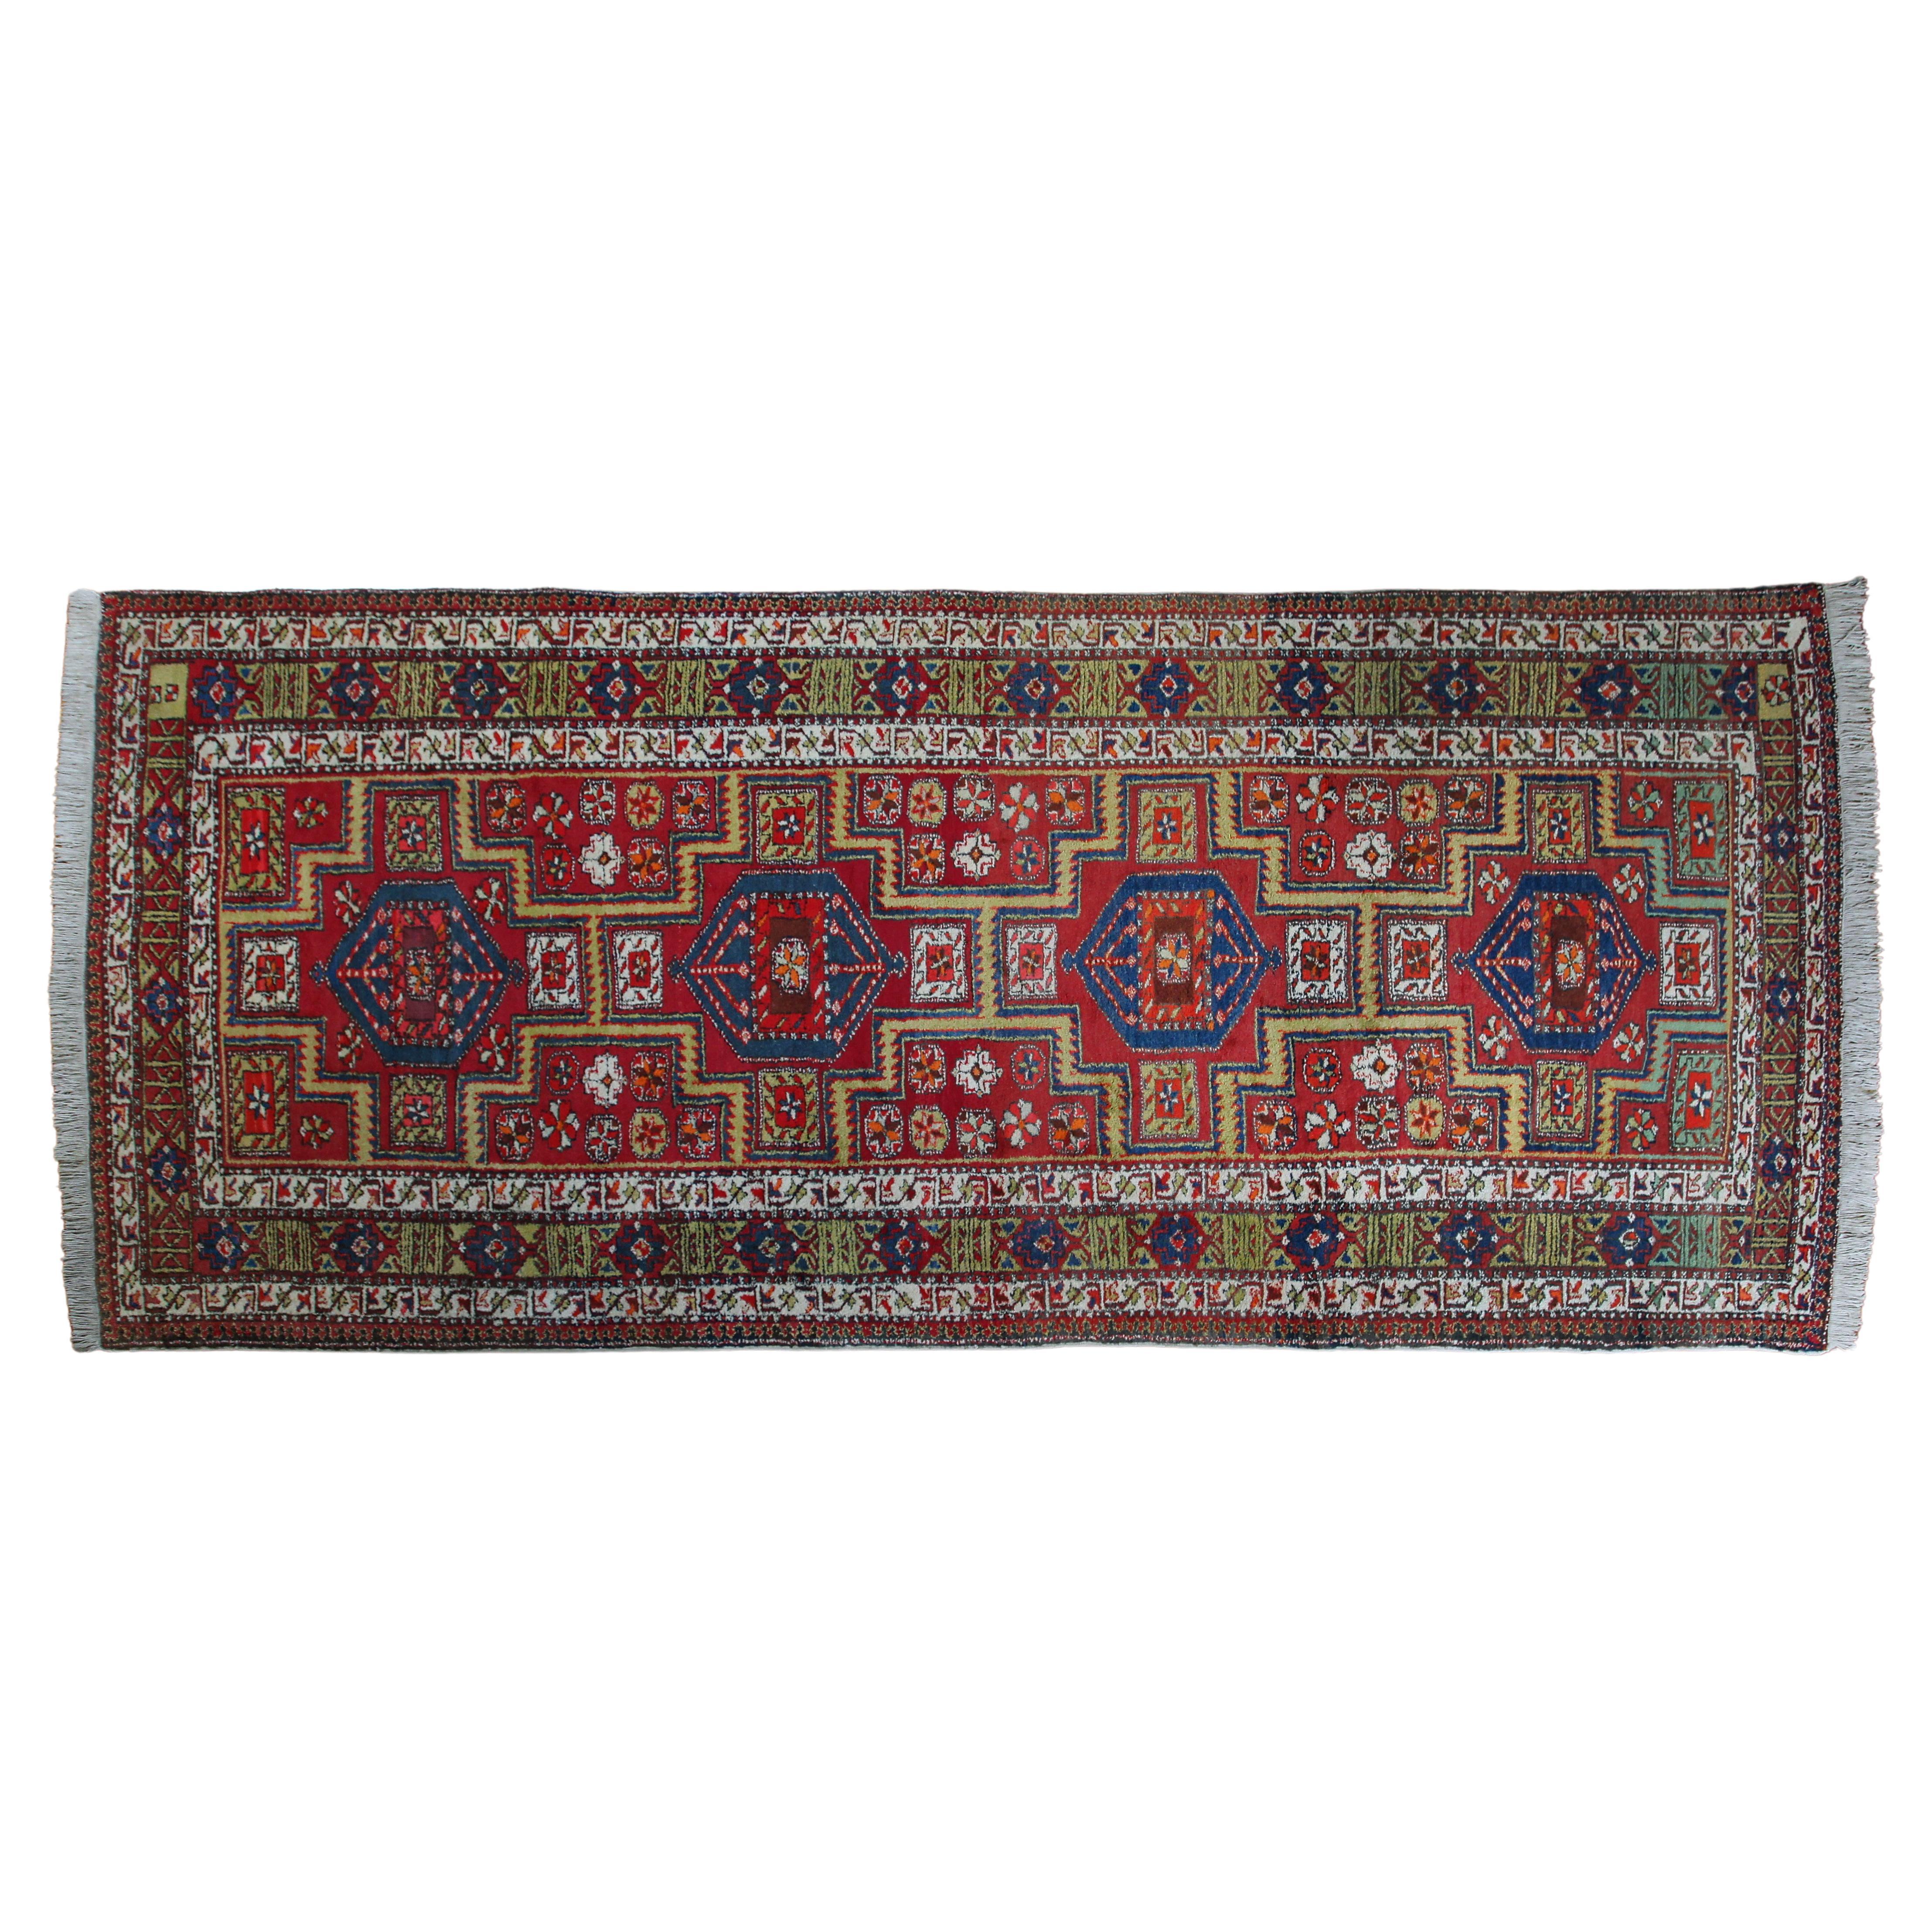 Persian carpet Beluch 372 X 161 cm For Sale